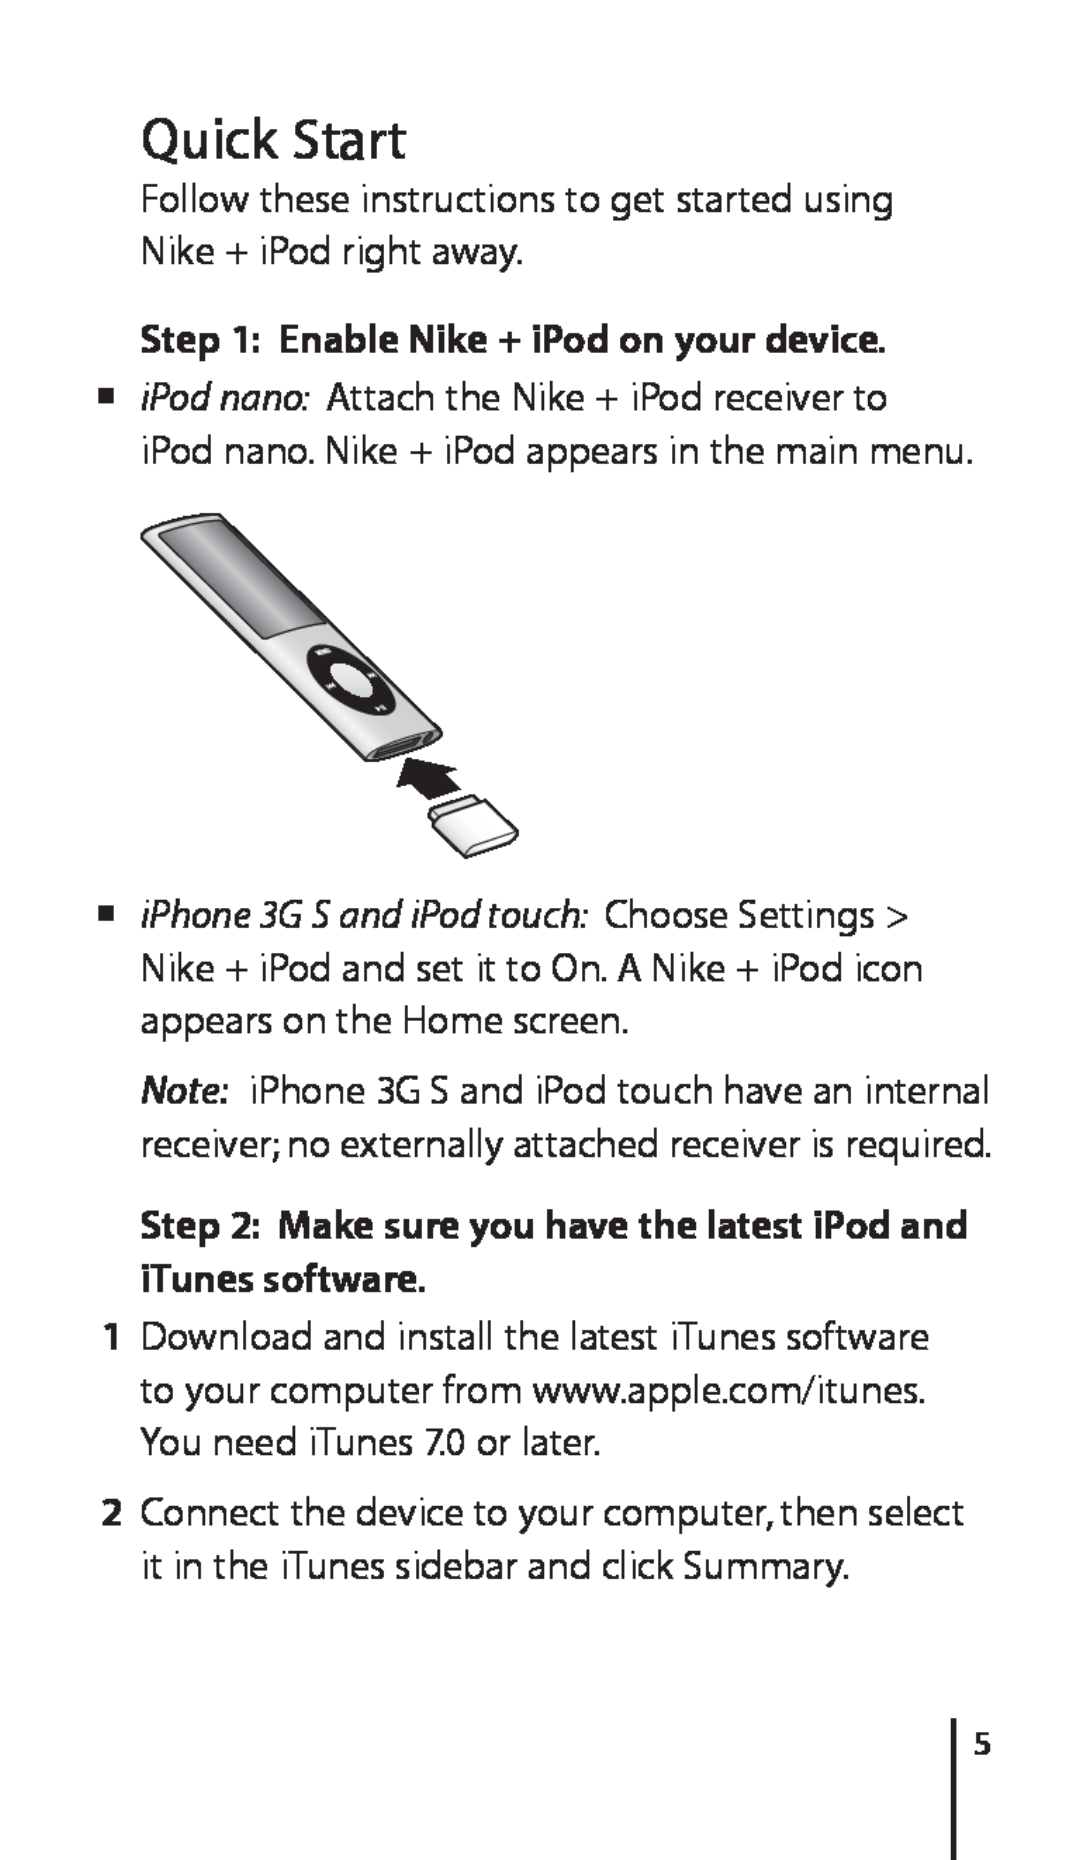 Apple 034-4945-A Quick Start, Enable Nike + iPod on your device, Make sure you have the latest iPod and iTunes software 